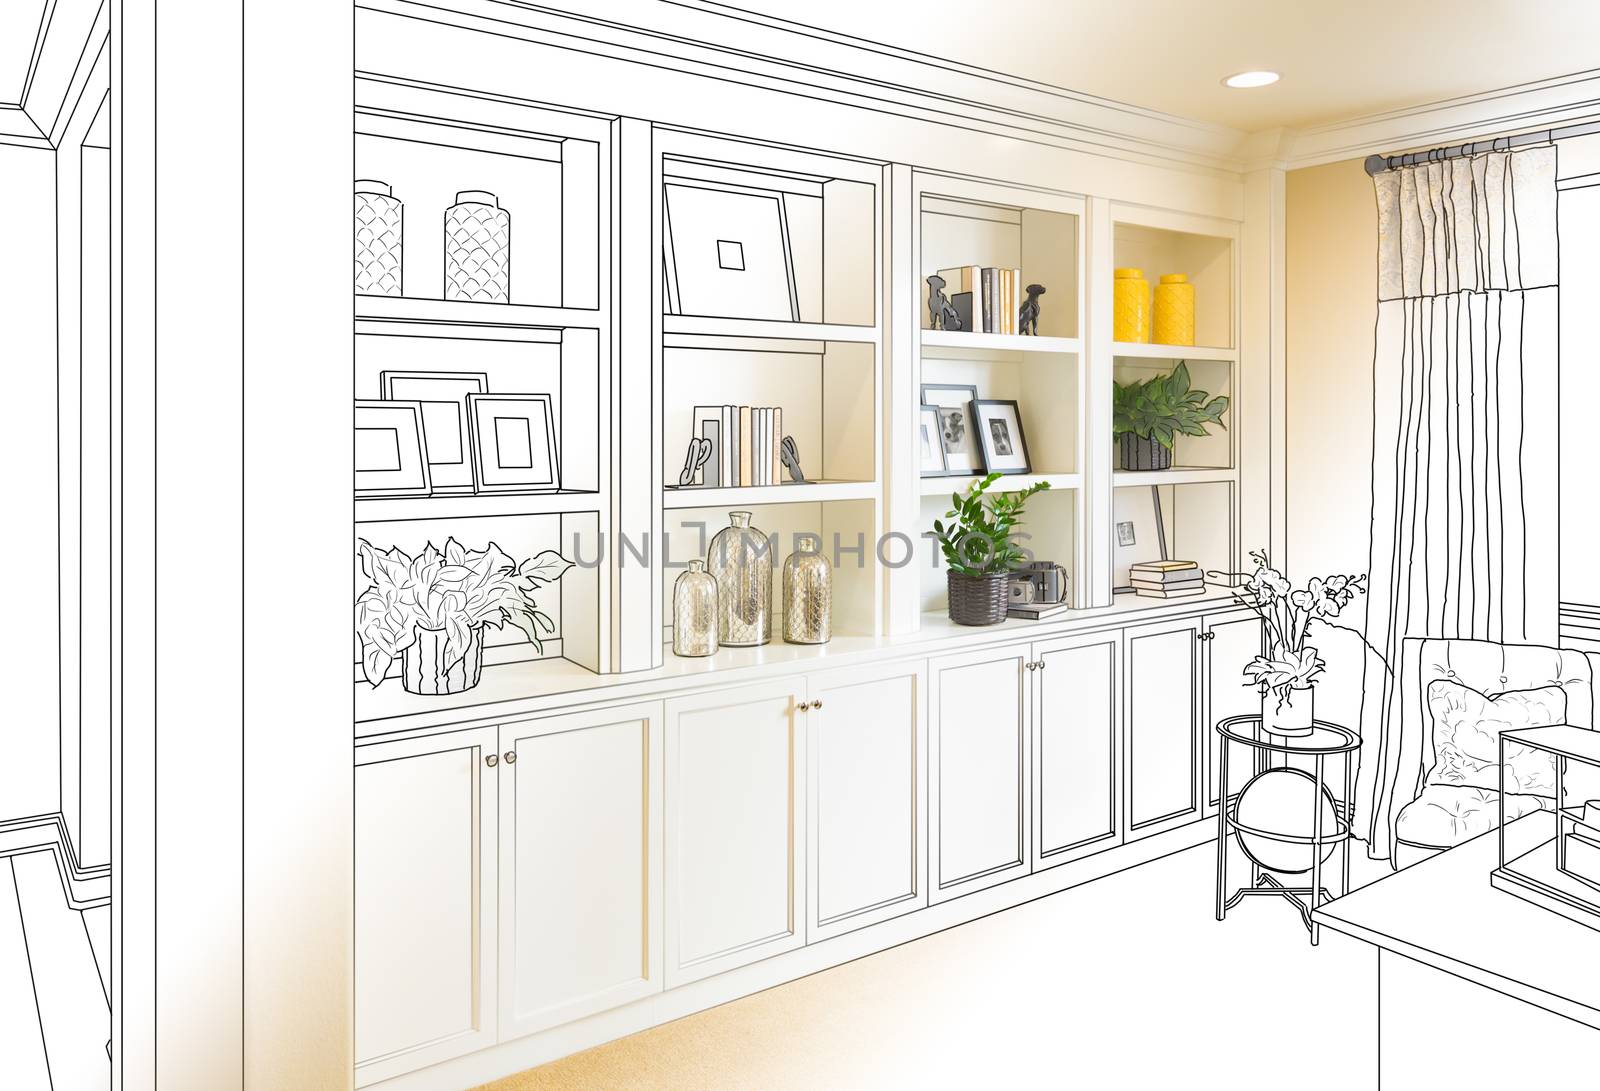 Custom Built-in Shelves and Cabinets Design Drawing Gradating to Finished Photo.